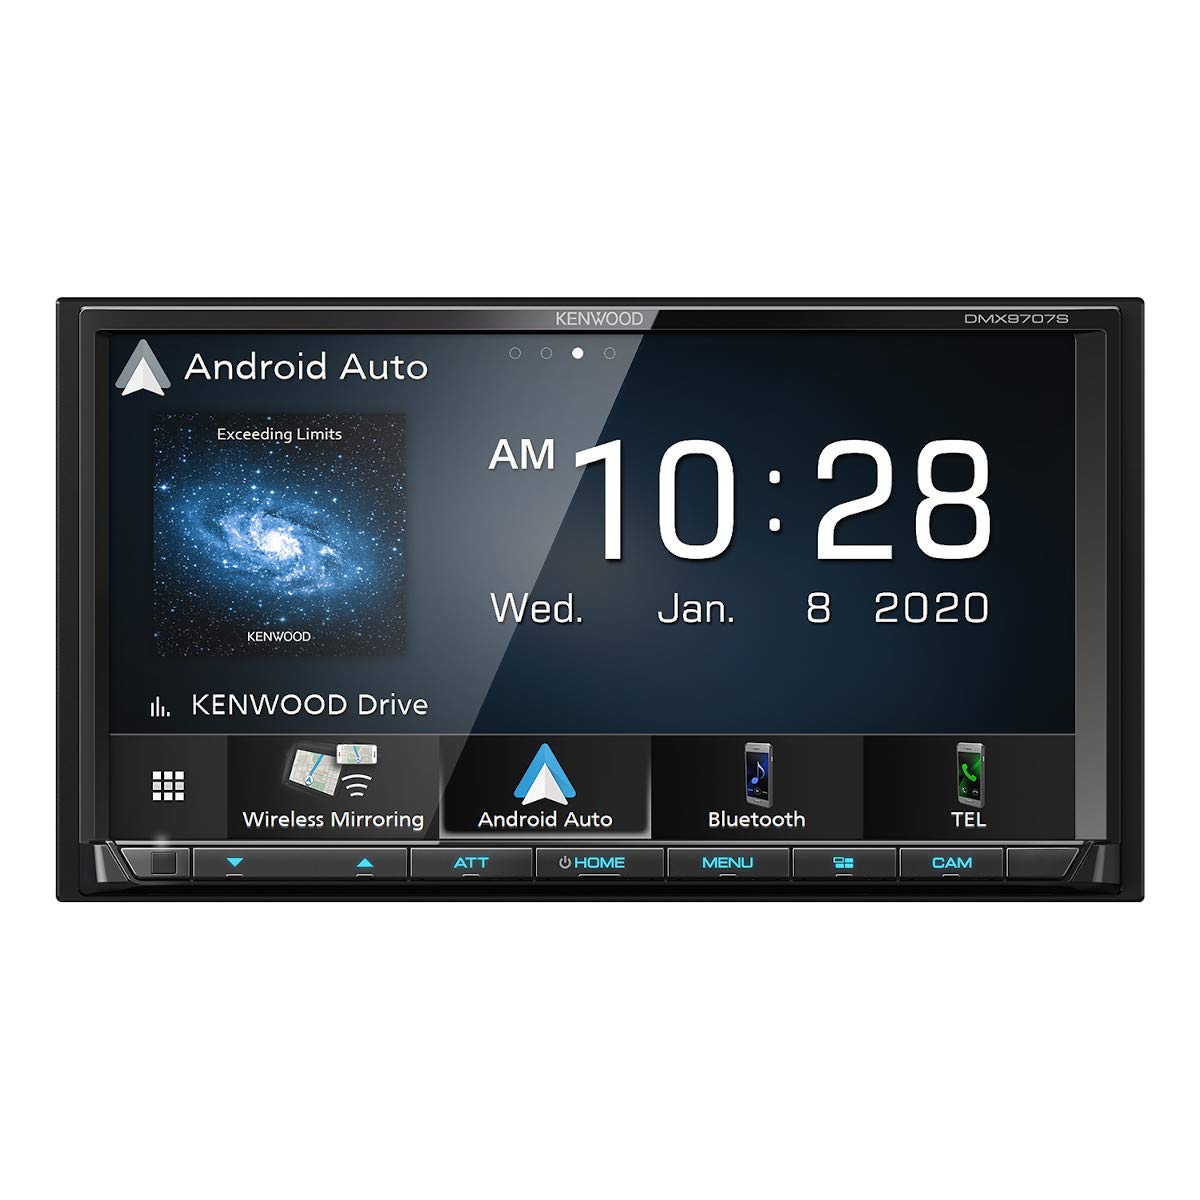 KENWOOD DMX9707S 6.95-Inch Capacitive Touch Screen, Car...